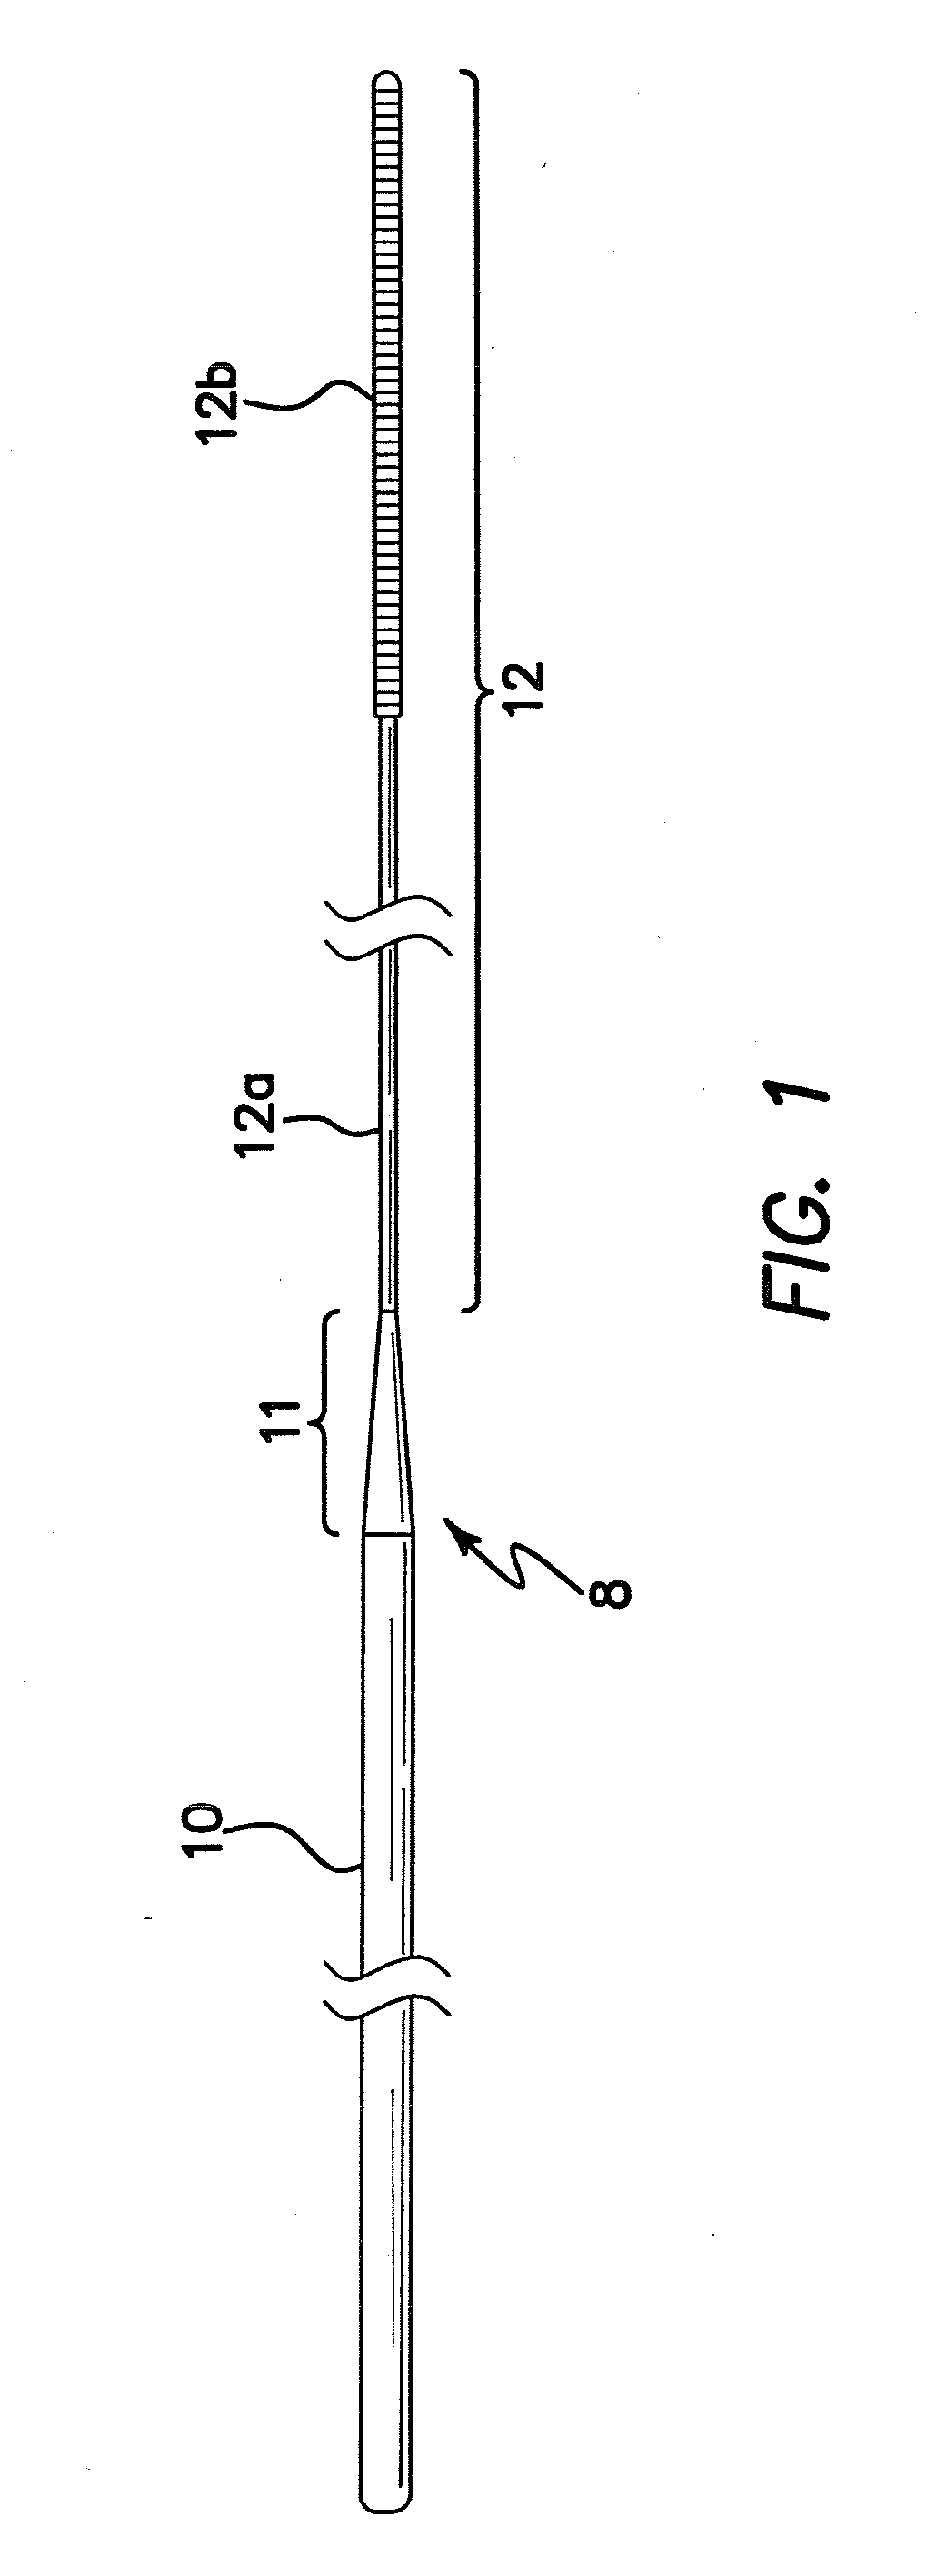 Apparatus and method for achieving micropuncture